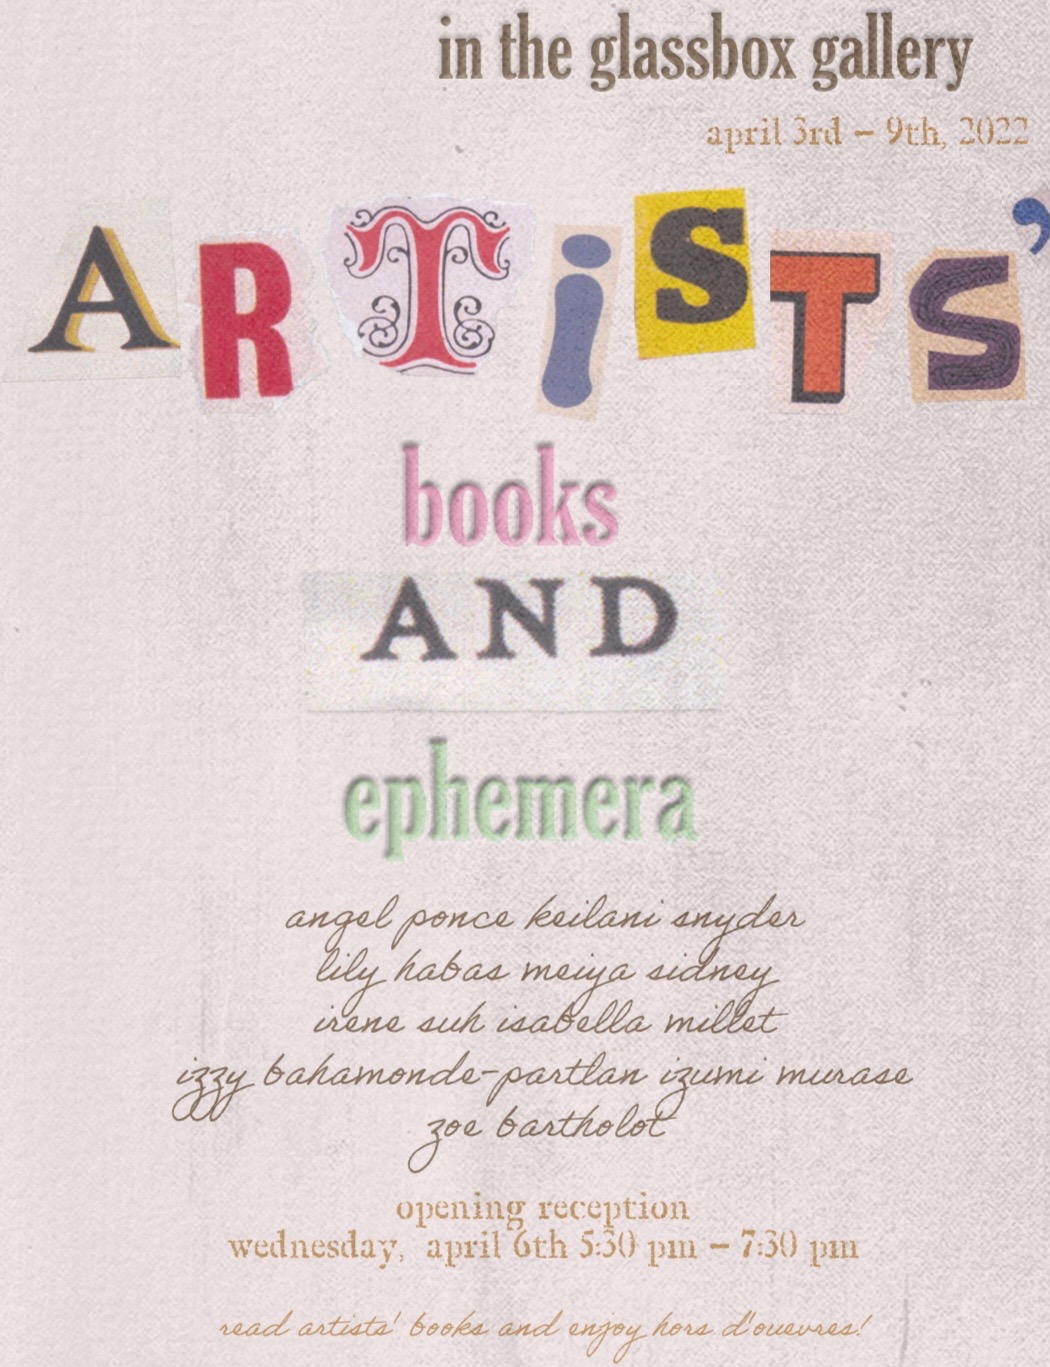 Artists' Books and Ephemera text in different colors and fonts